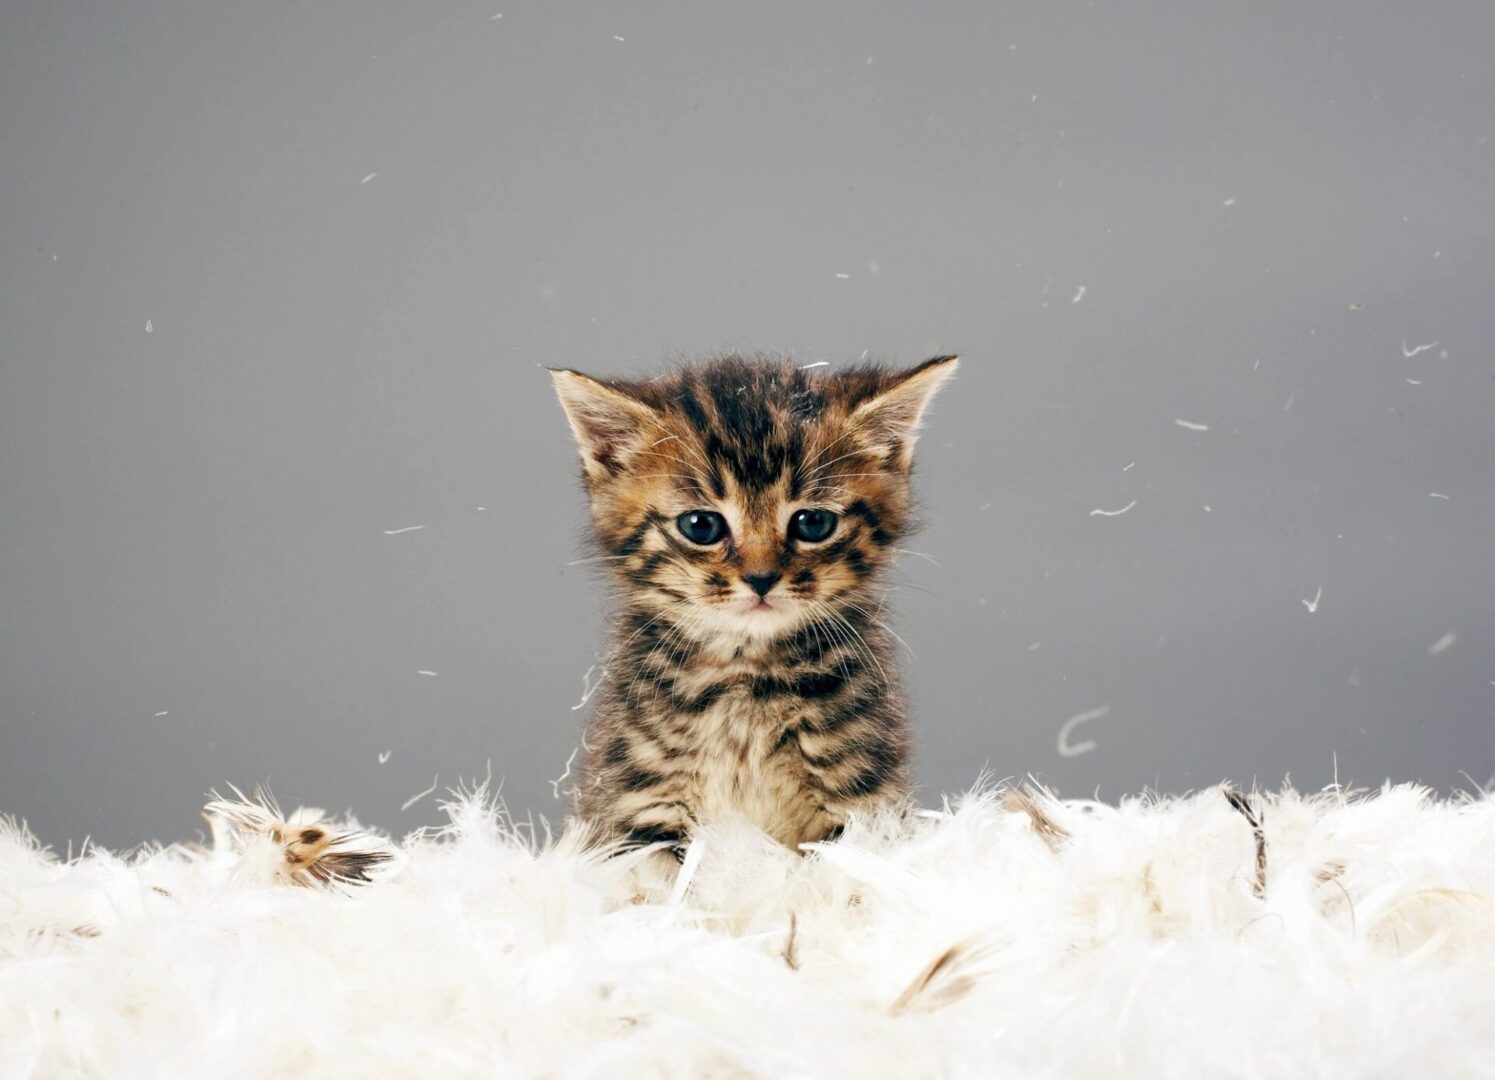 Kitten playing in feathers.